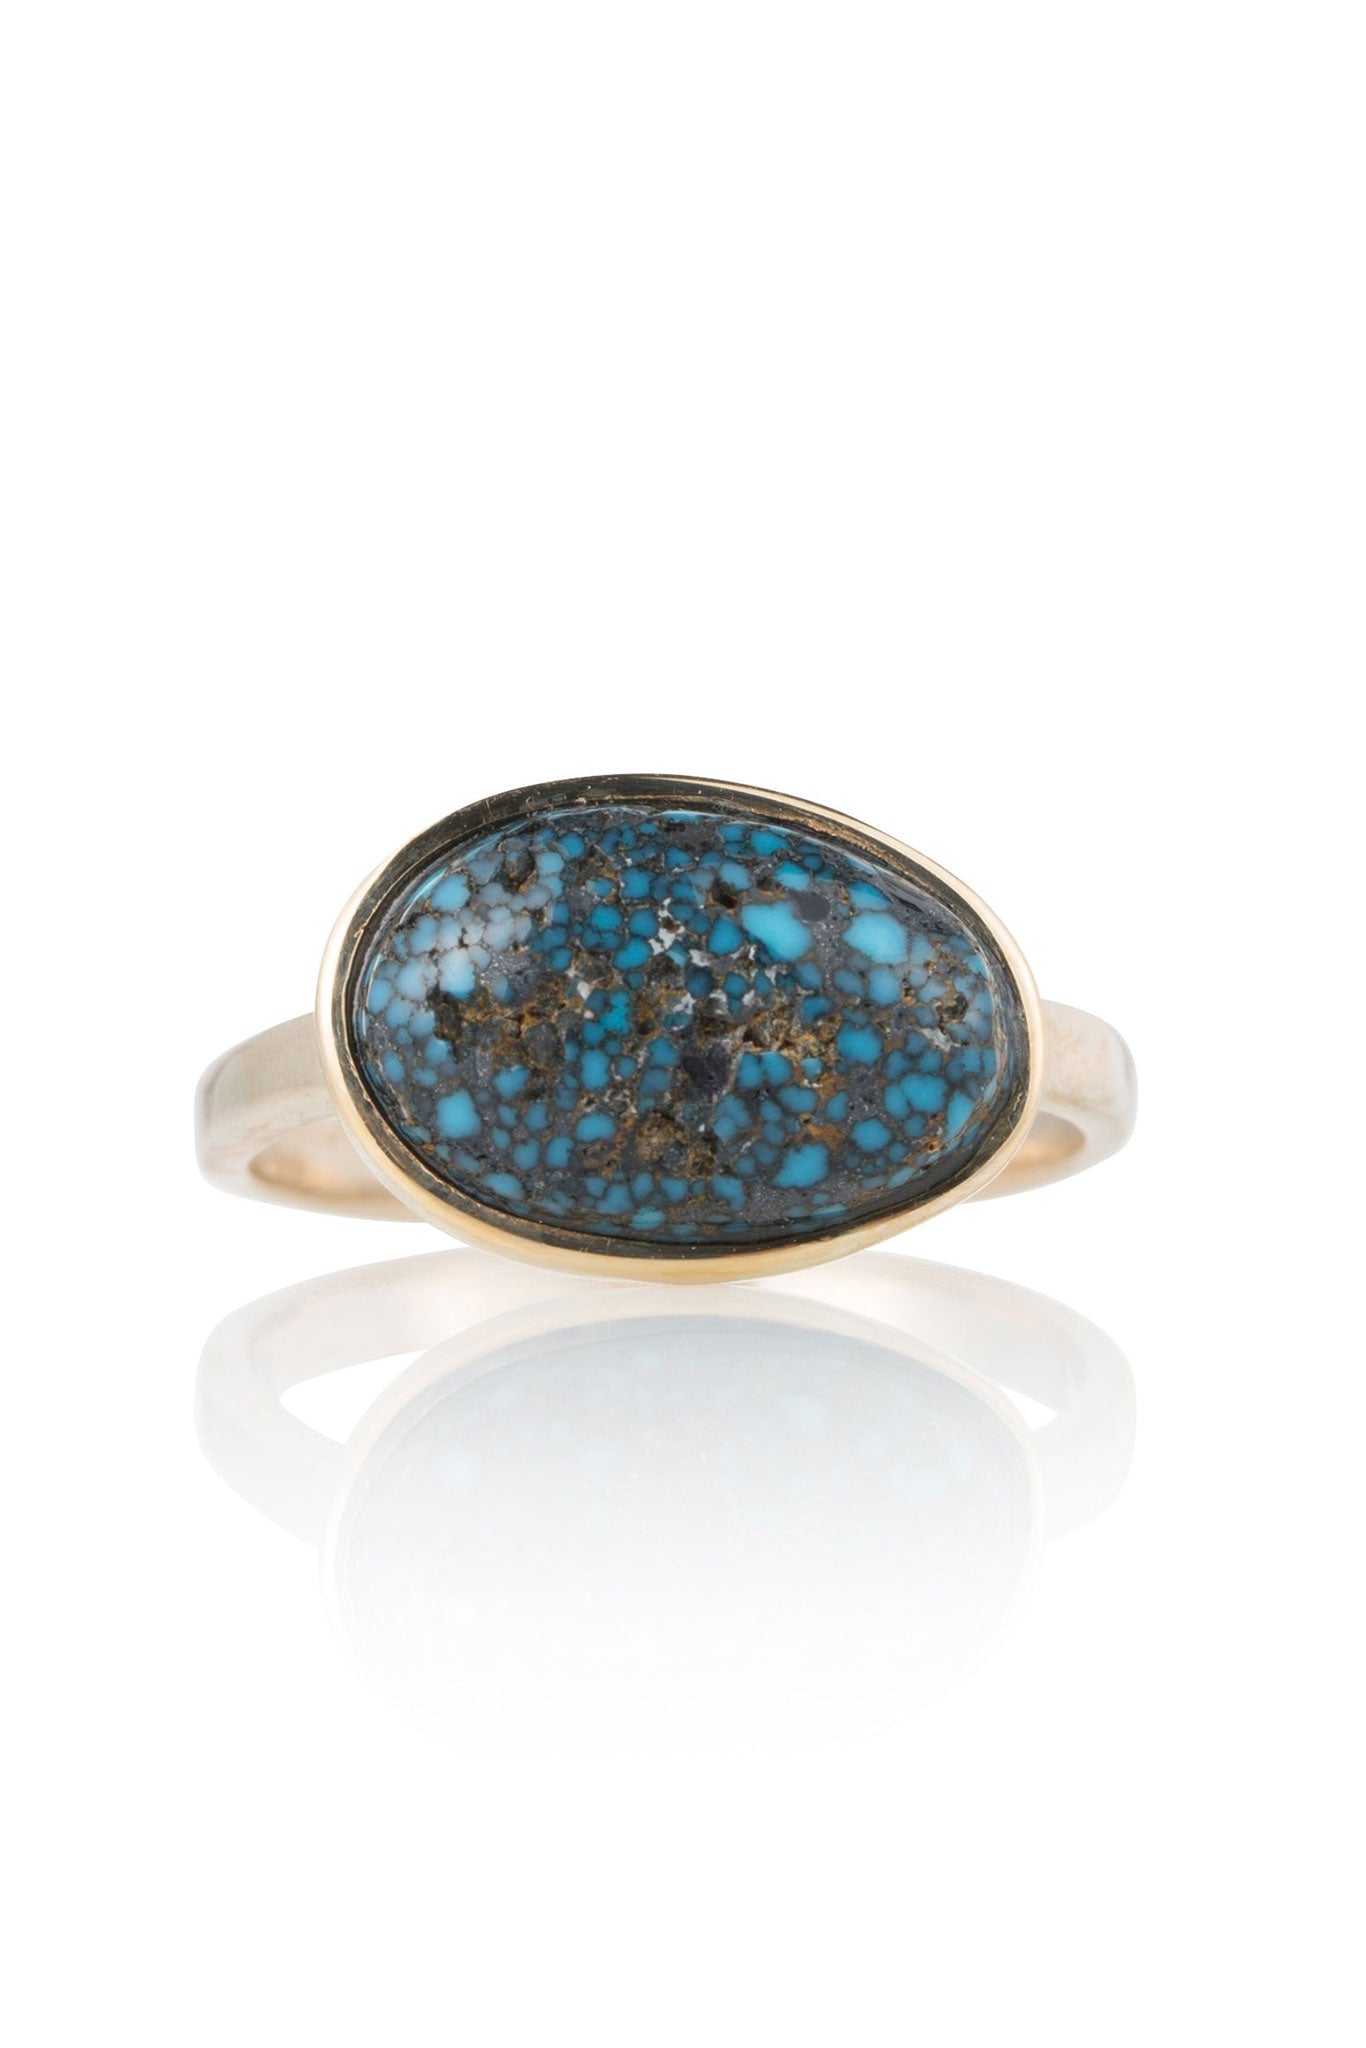 Rare Blue Turquoise Cabochon Ring